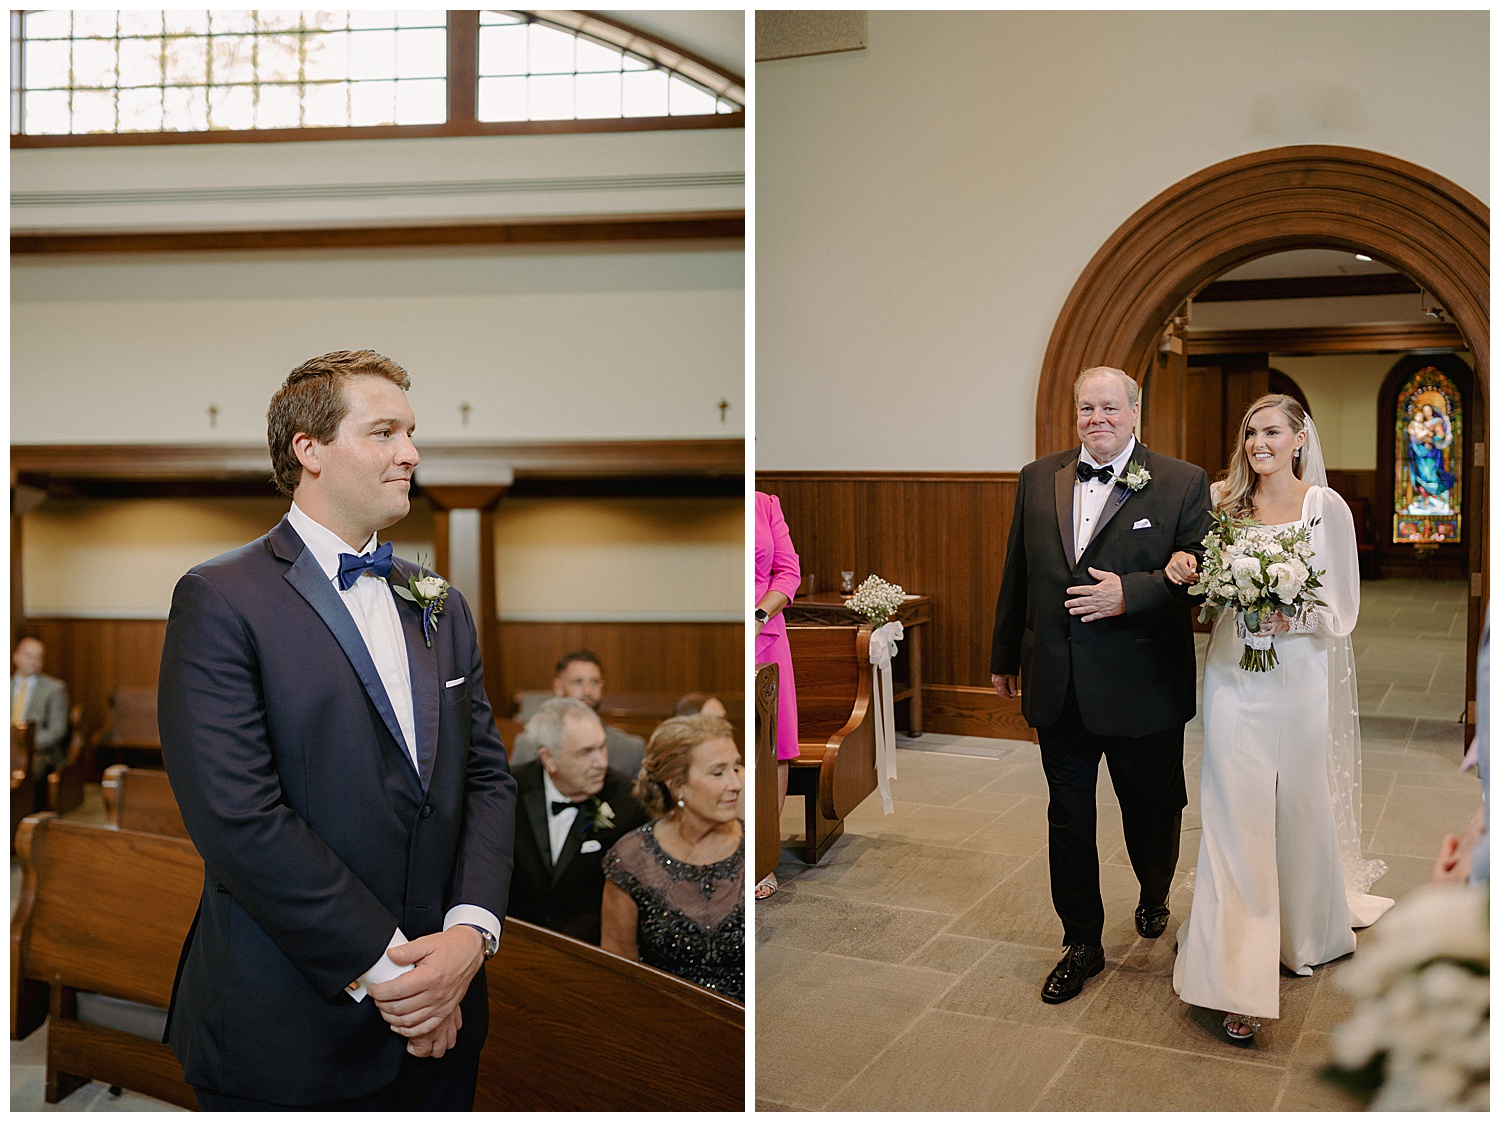 Groom watching bride walk down the isle with her father